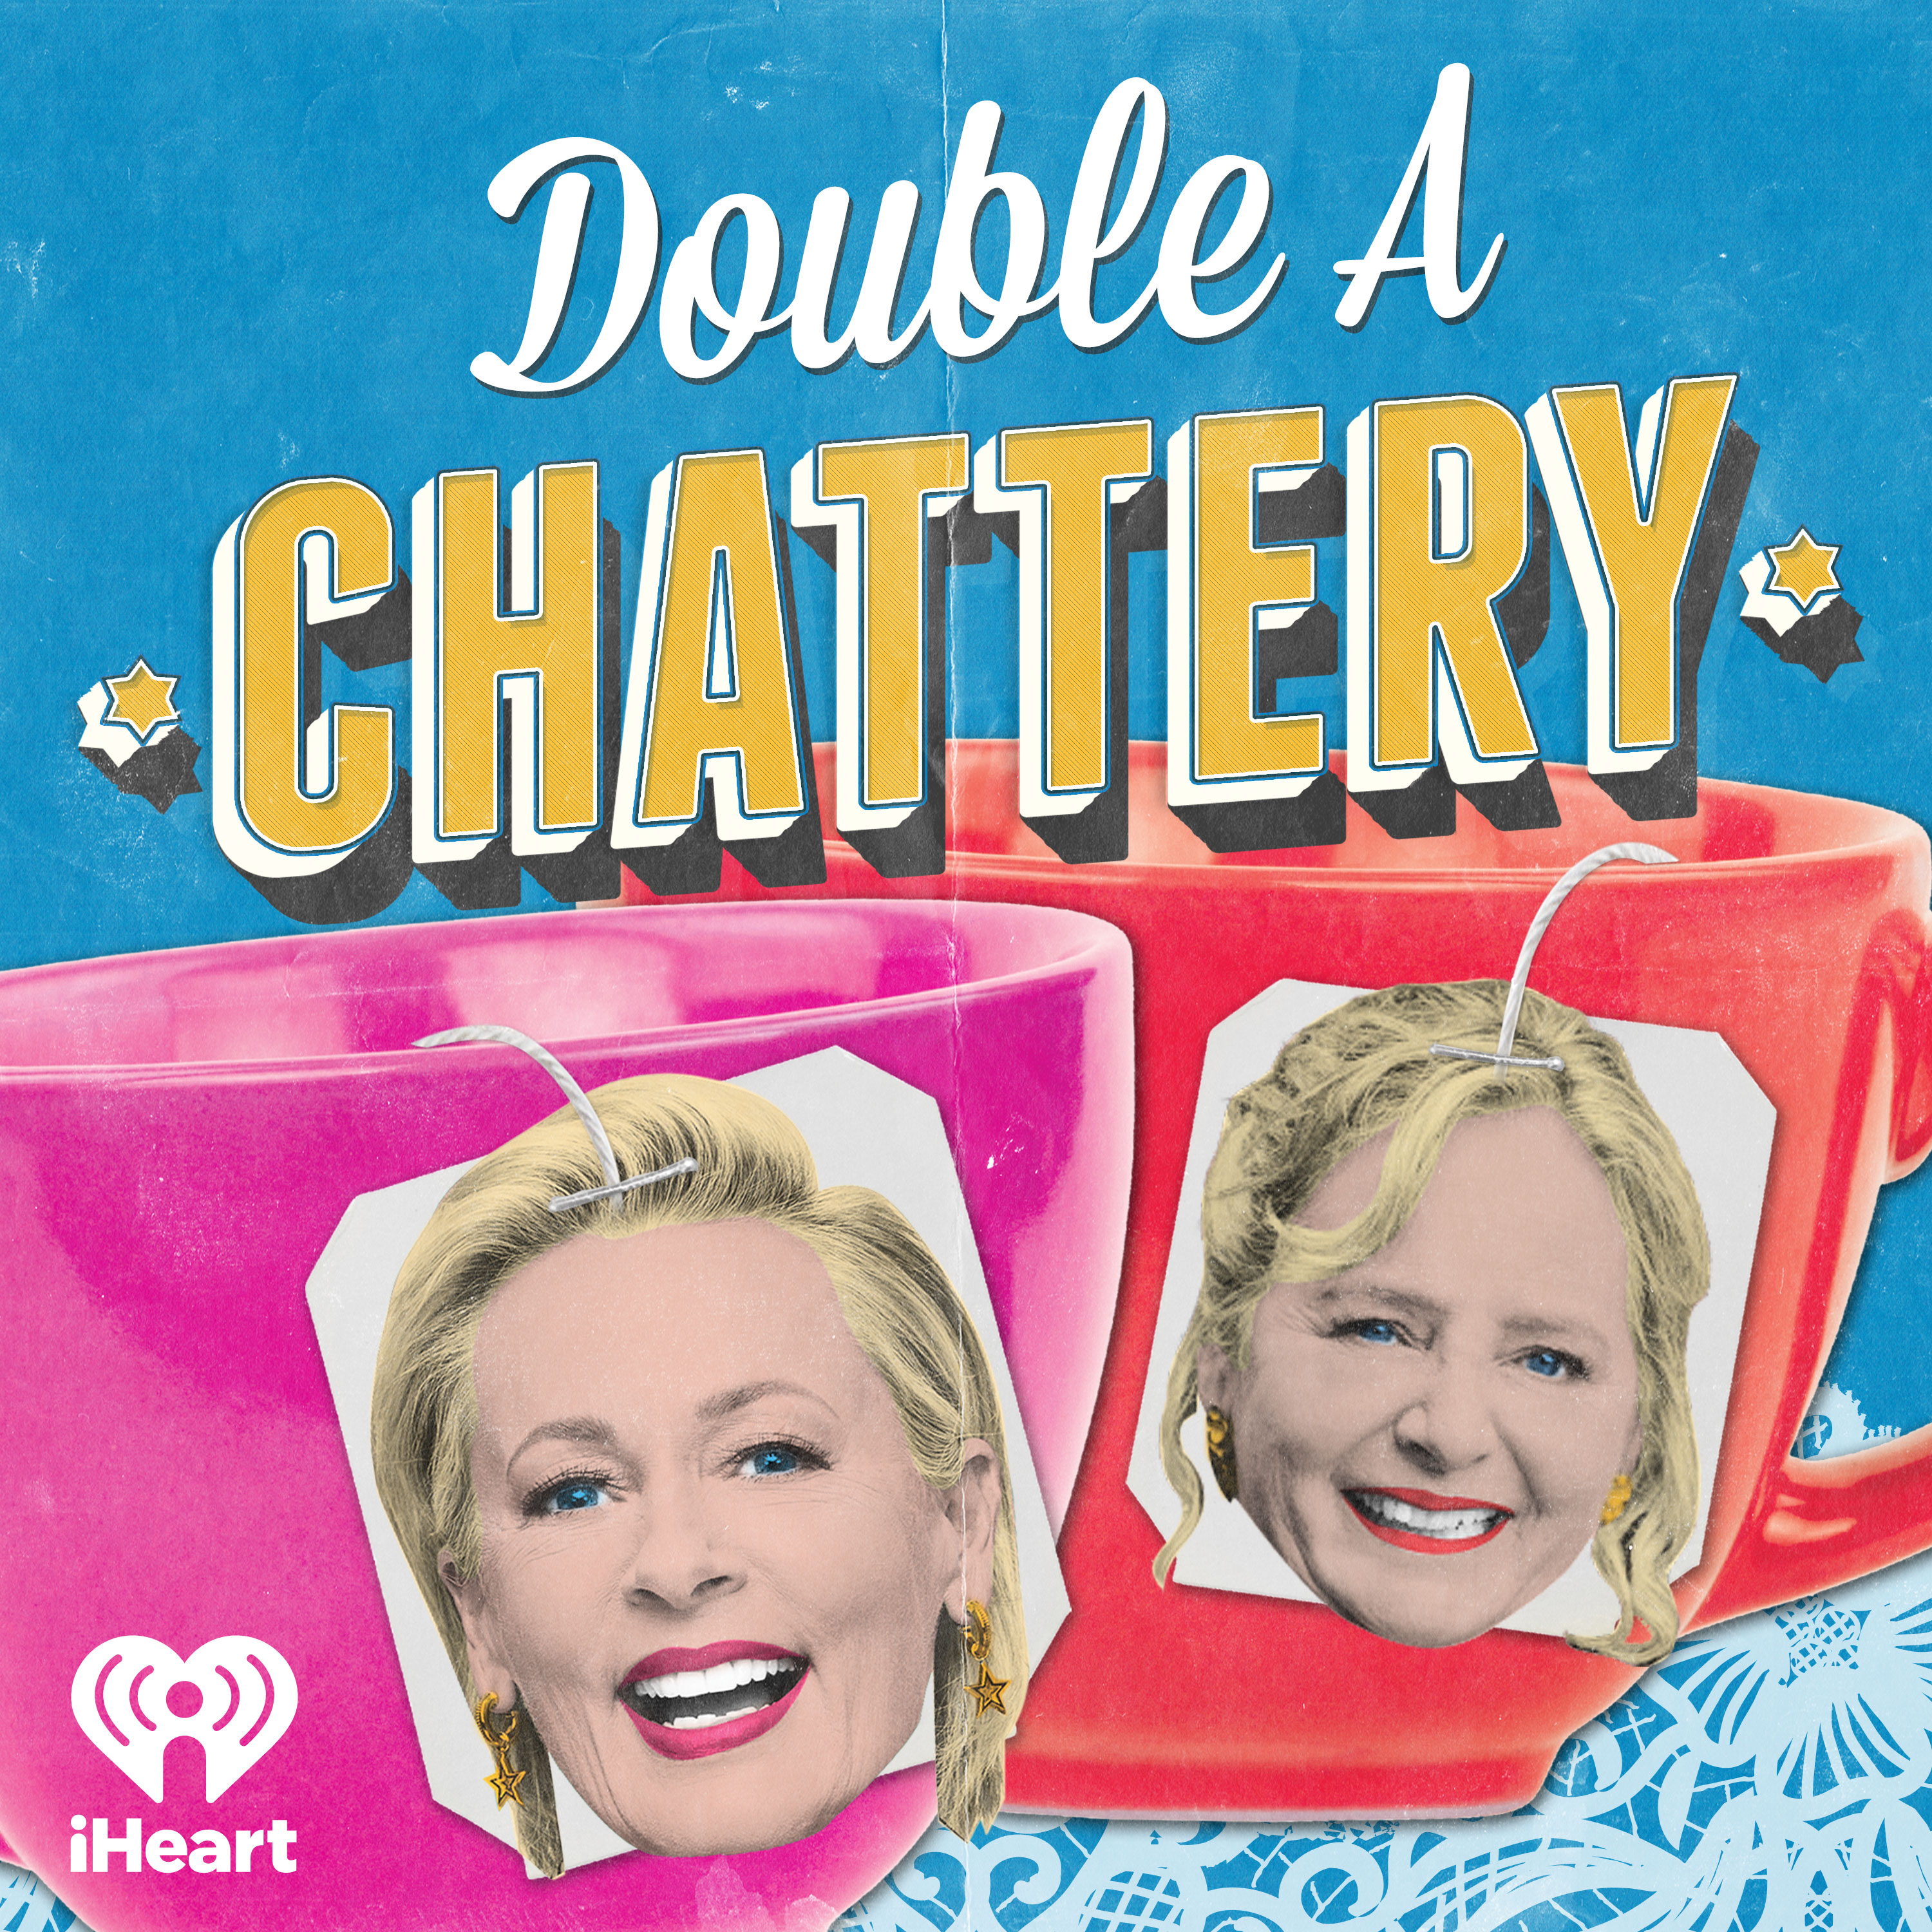 Introducing… Double A Chattery!